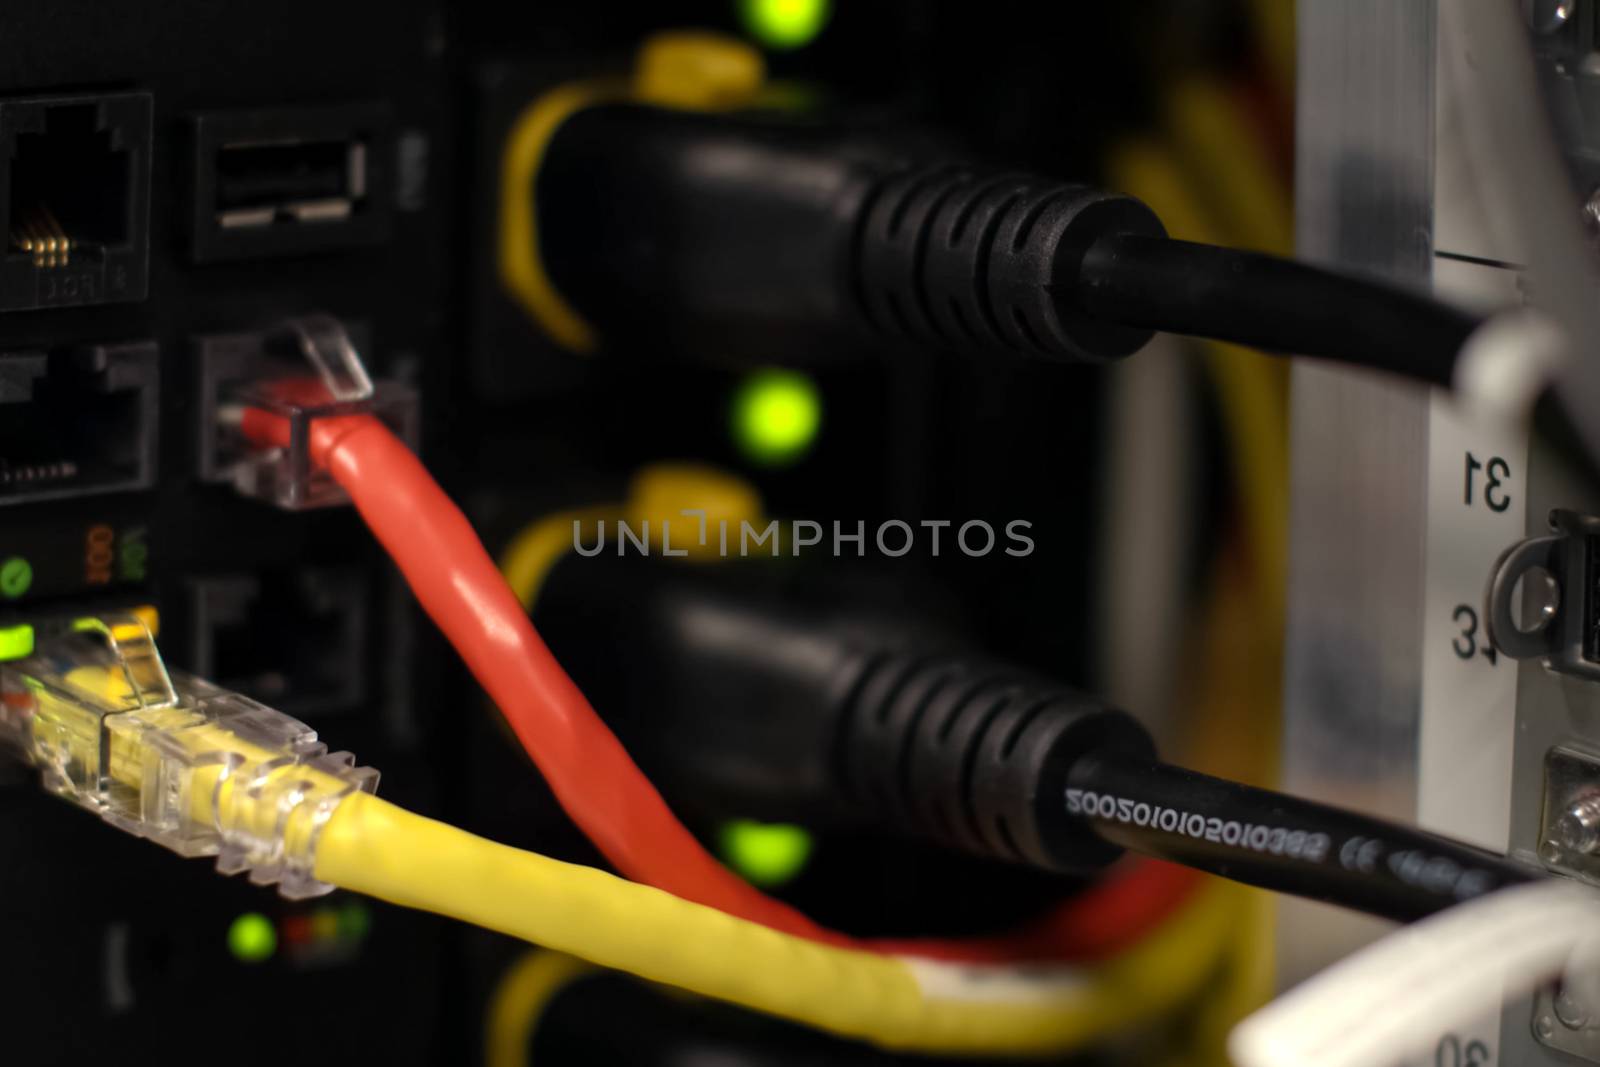 Connections of Internet cables with servers. Server date centers by nyrok